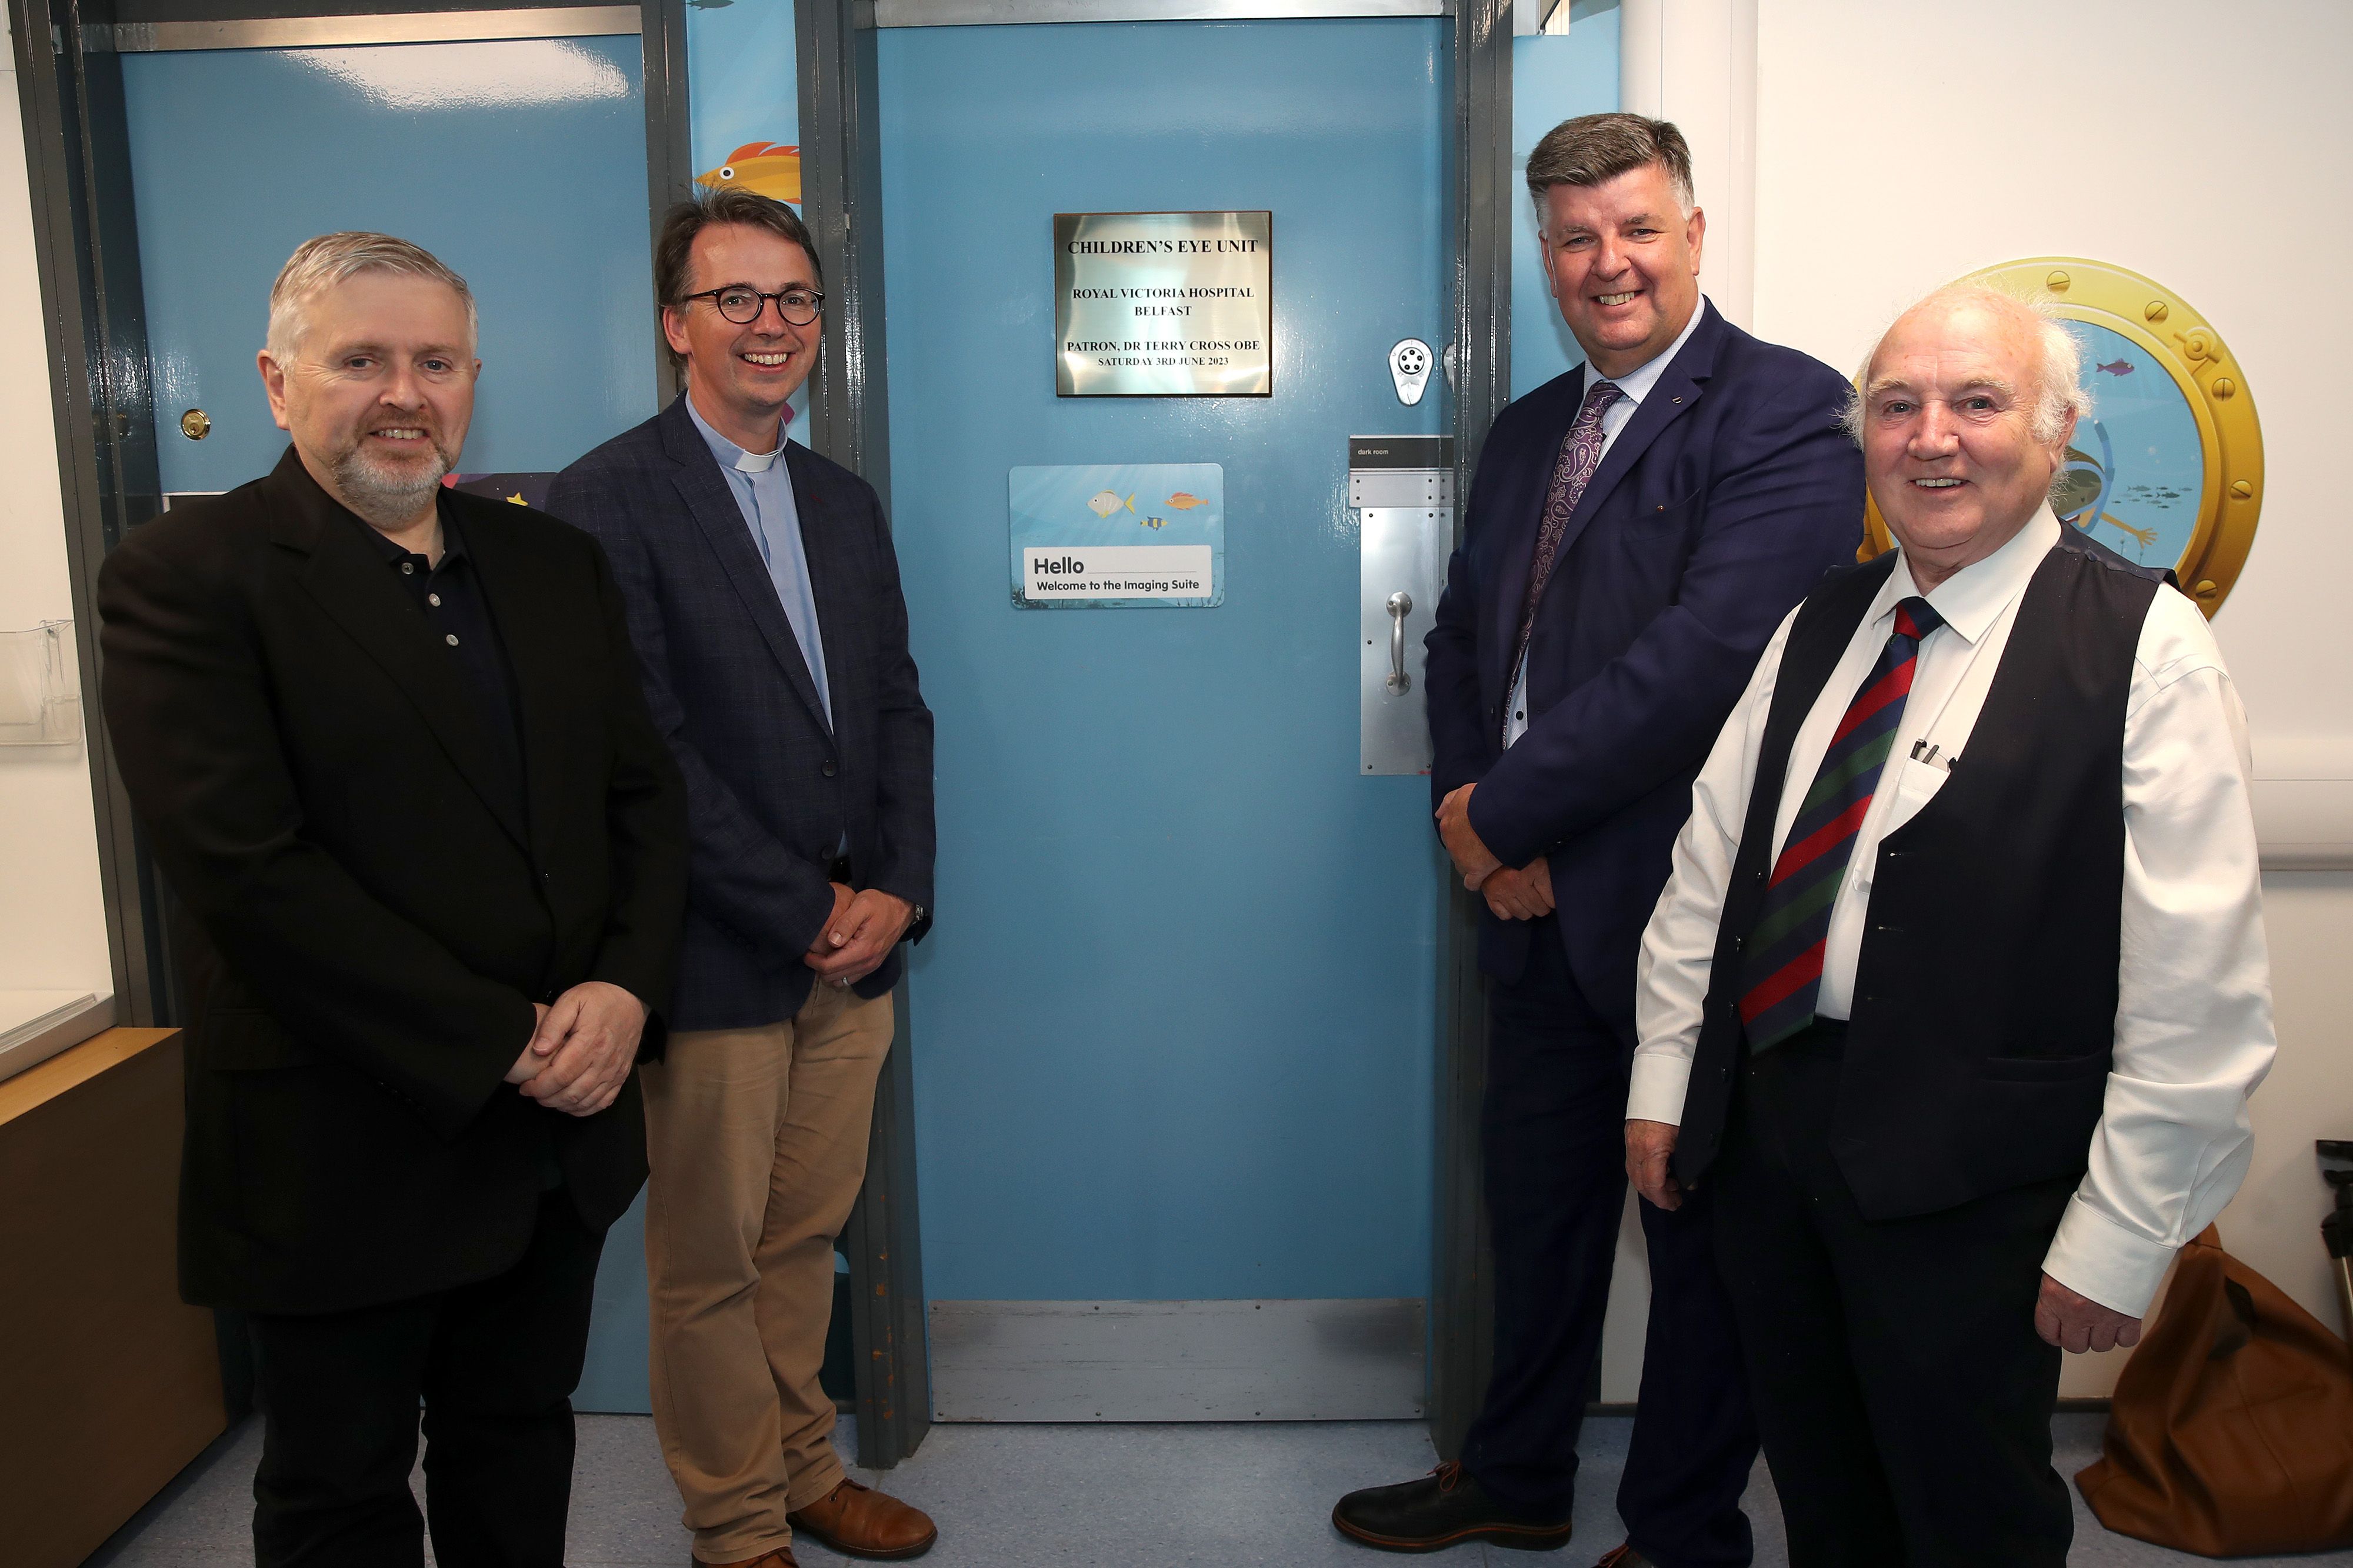 PLAQUE: Fr Gary Donegan, Rev Dr Stanley Gamble, Kevin Whelan (ForSight NI) and Dr Terry Cross 